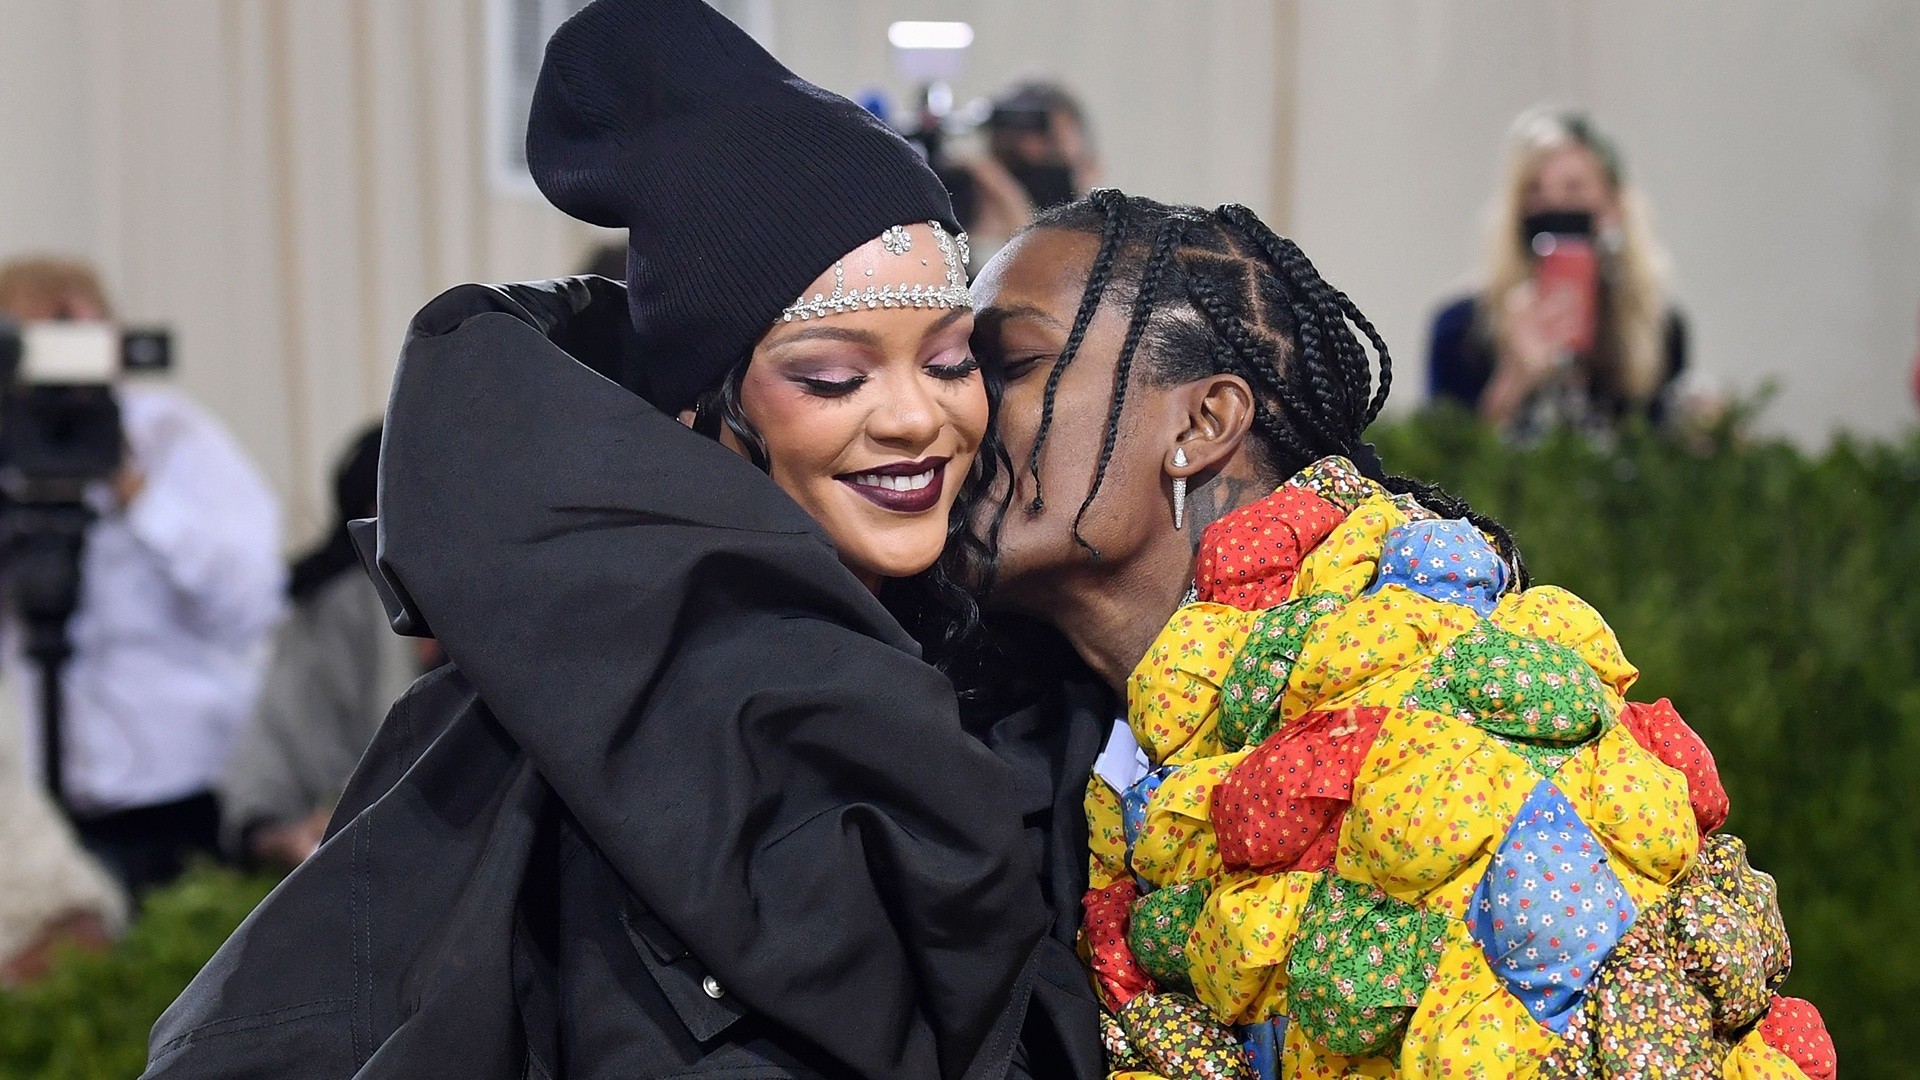 ASAP Rocky Calls Pregnant Rihanna His 'Wife' in Sweet Performance